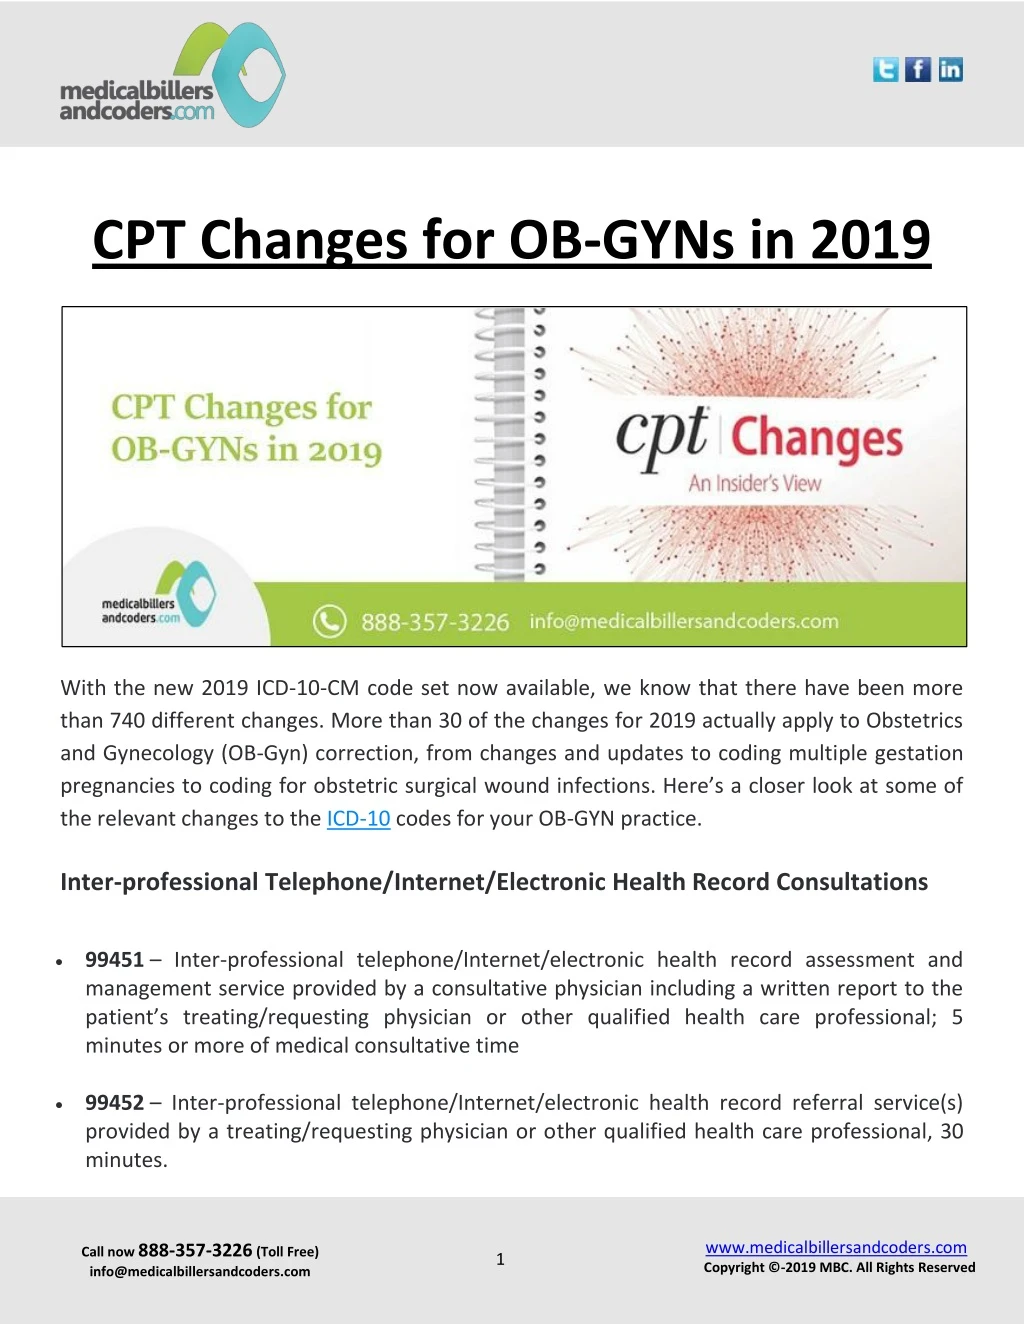 cpt changes for ob gyns in 2019